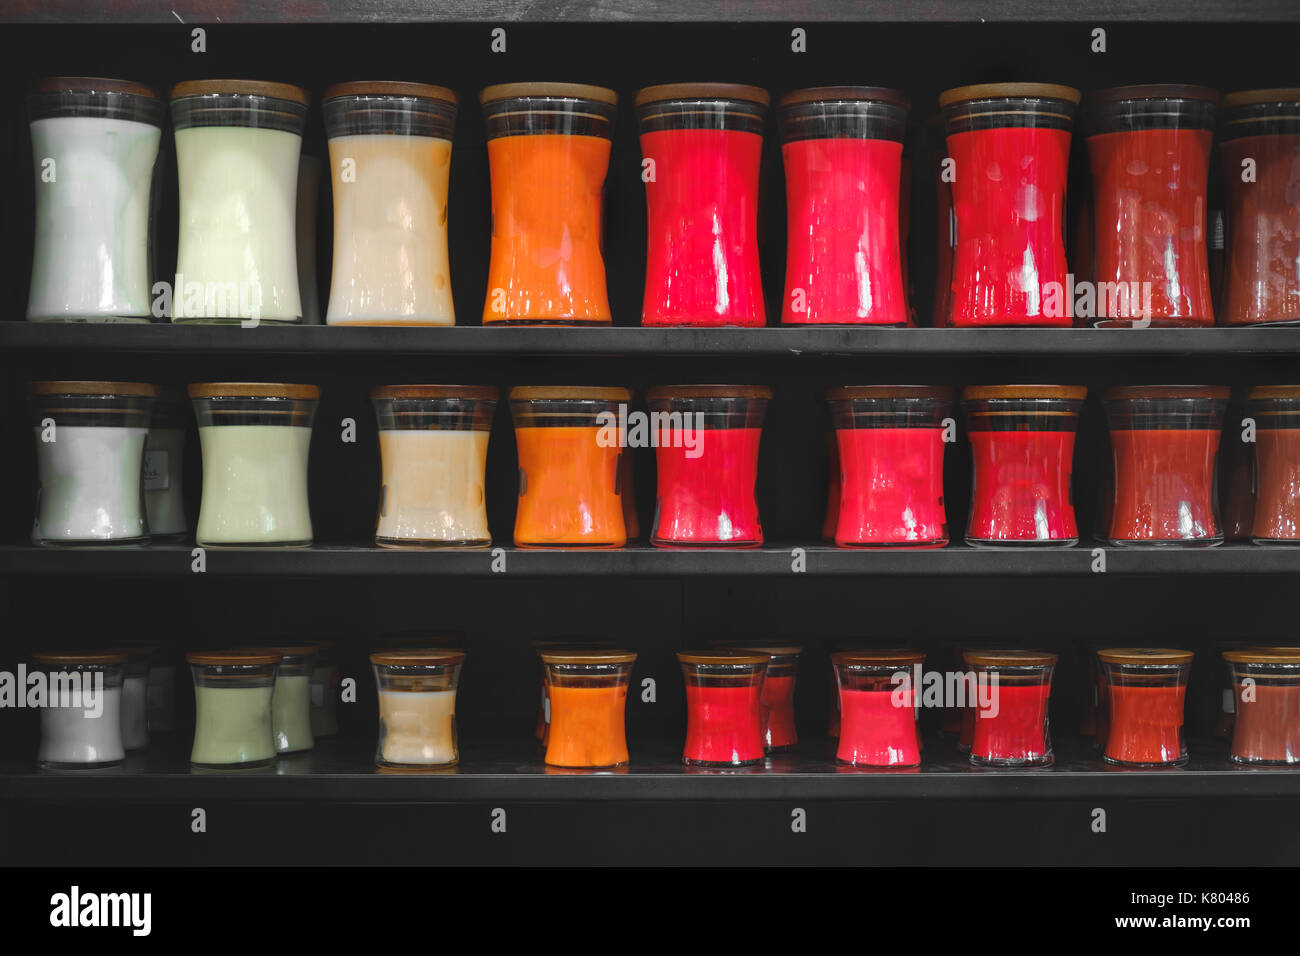 candle store scented candles shelves black background shelf matte Stock Photo